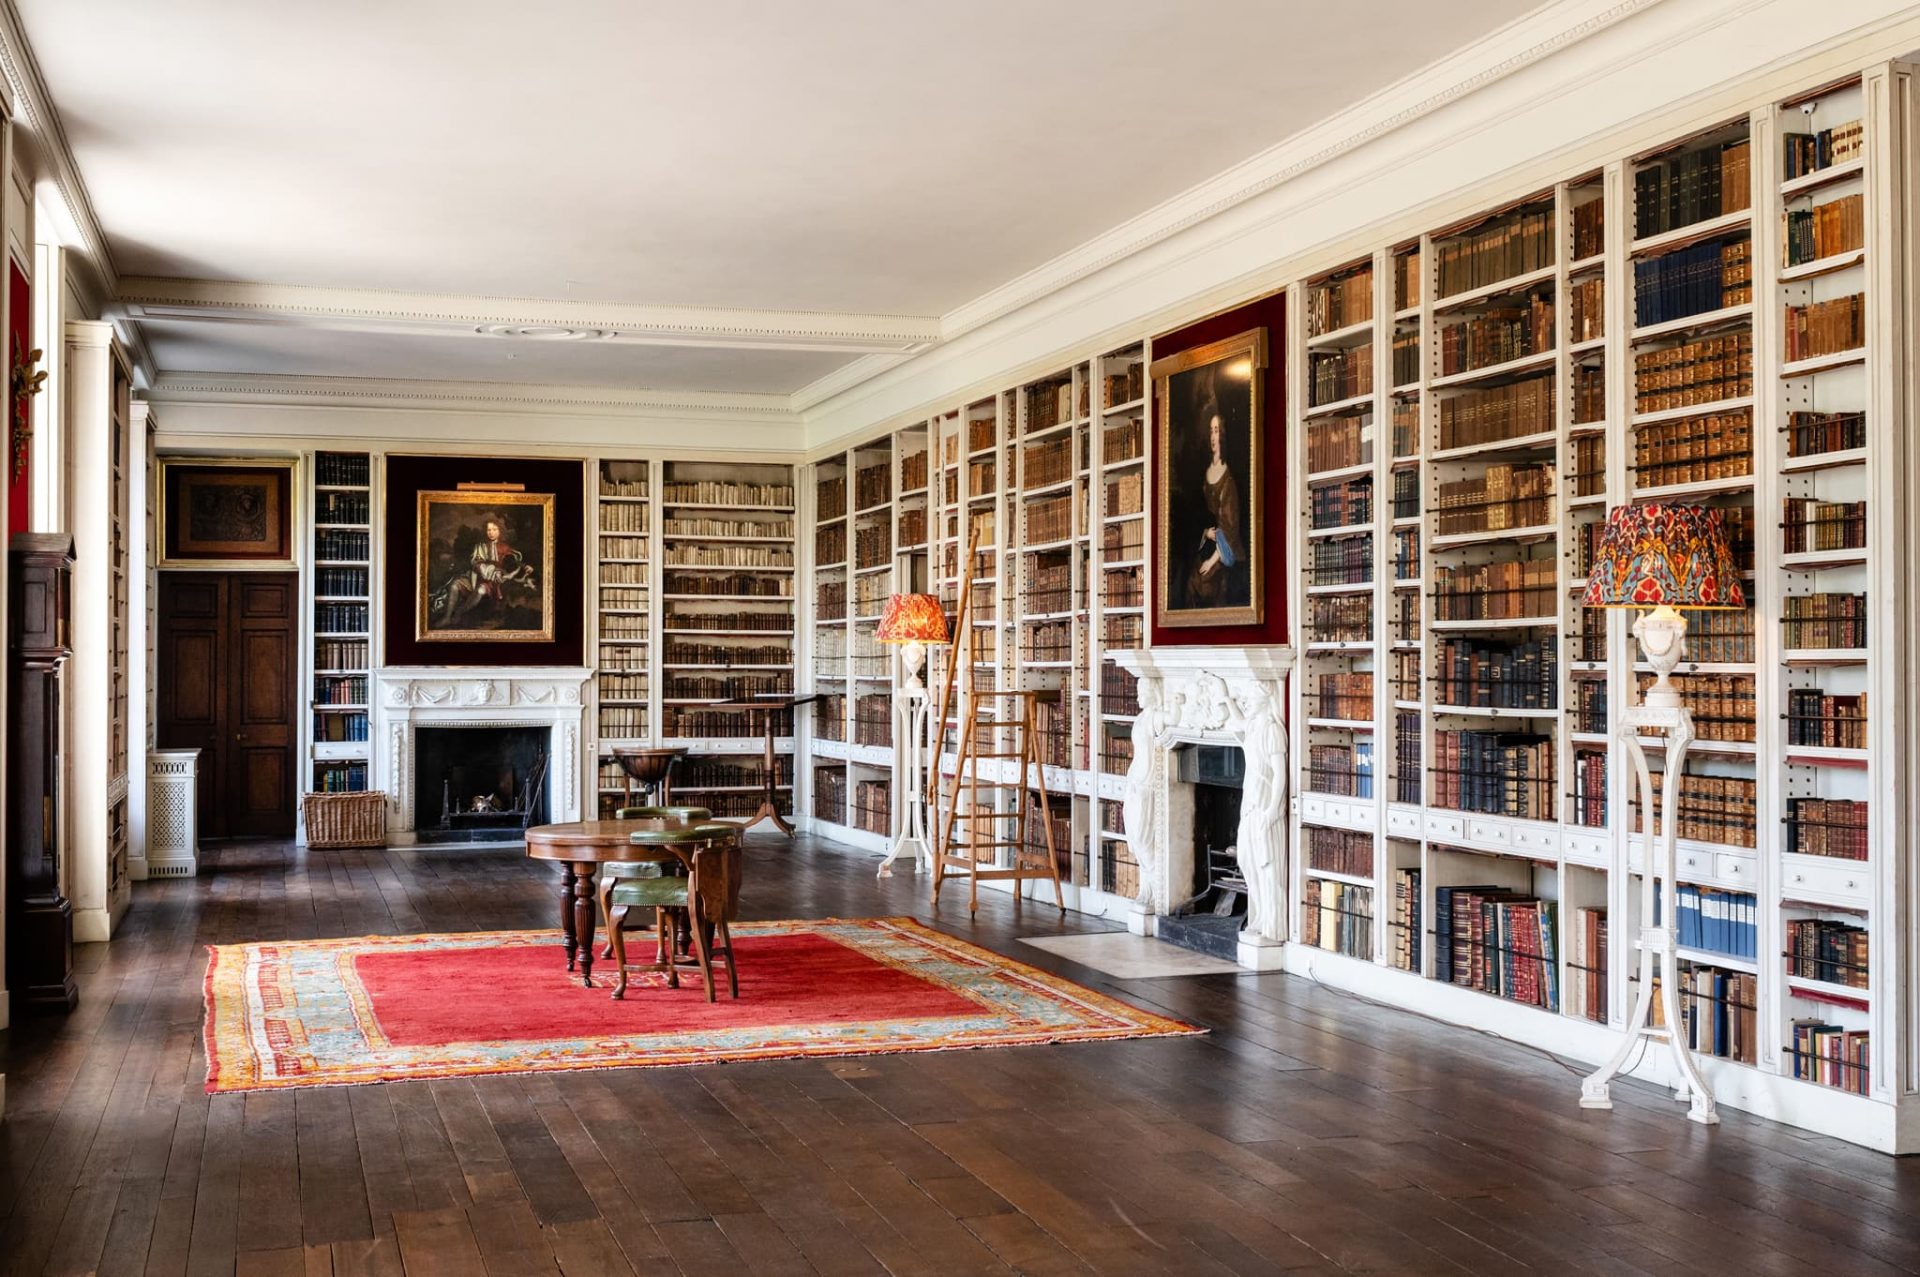 The library at St Giles House in Dorset